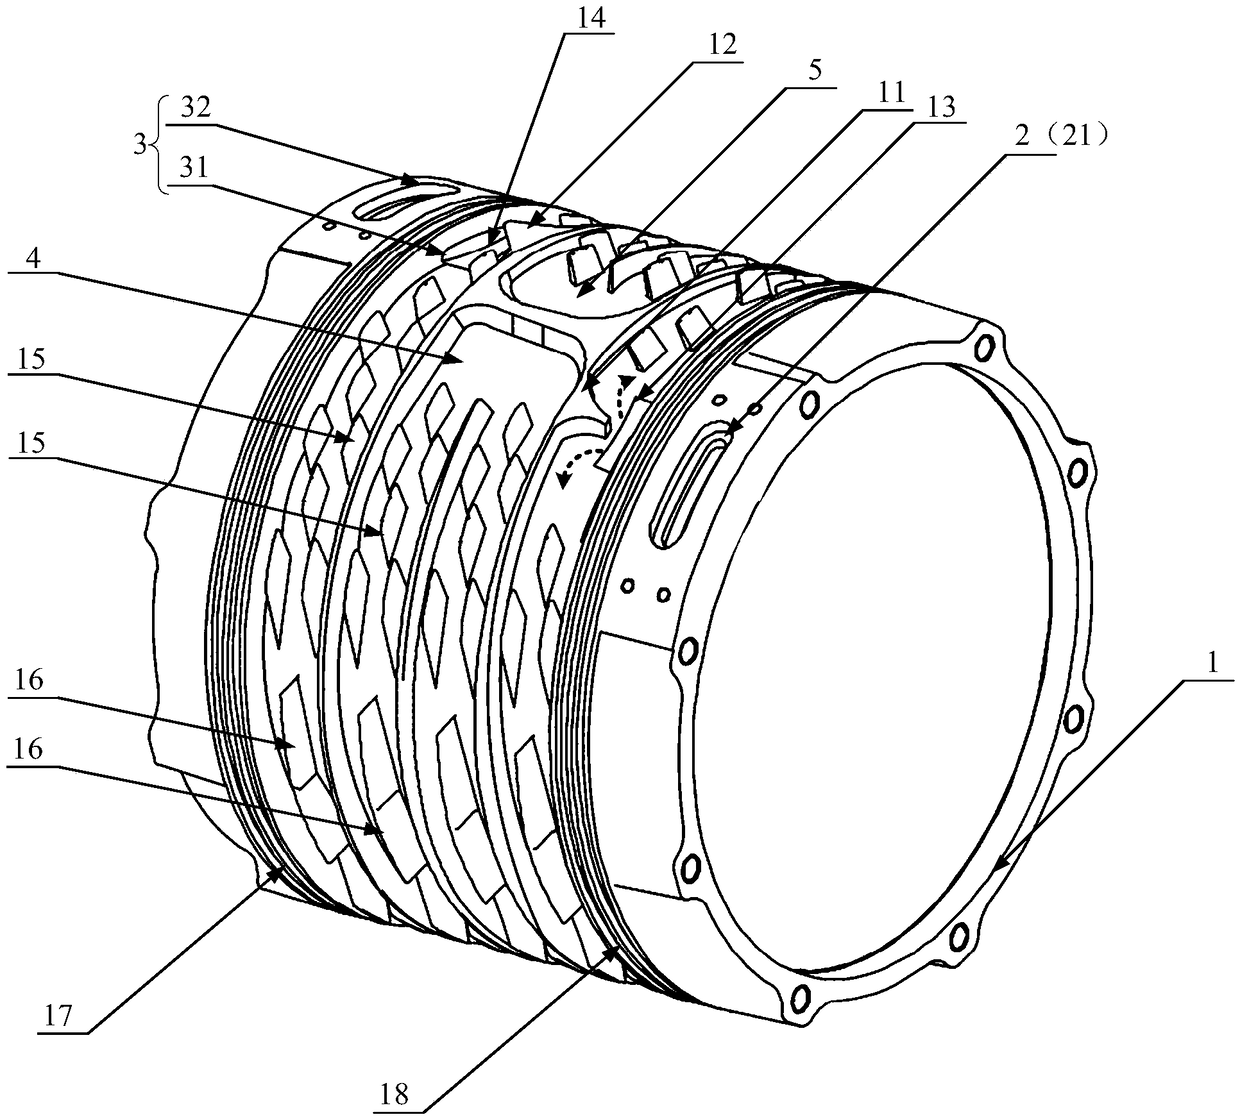 Water-cooling motor case and motor